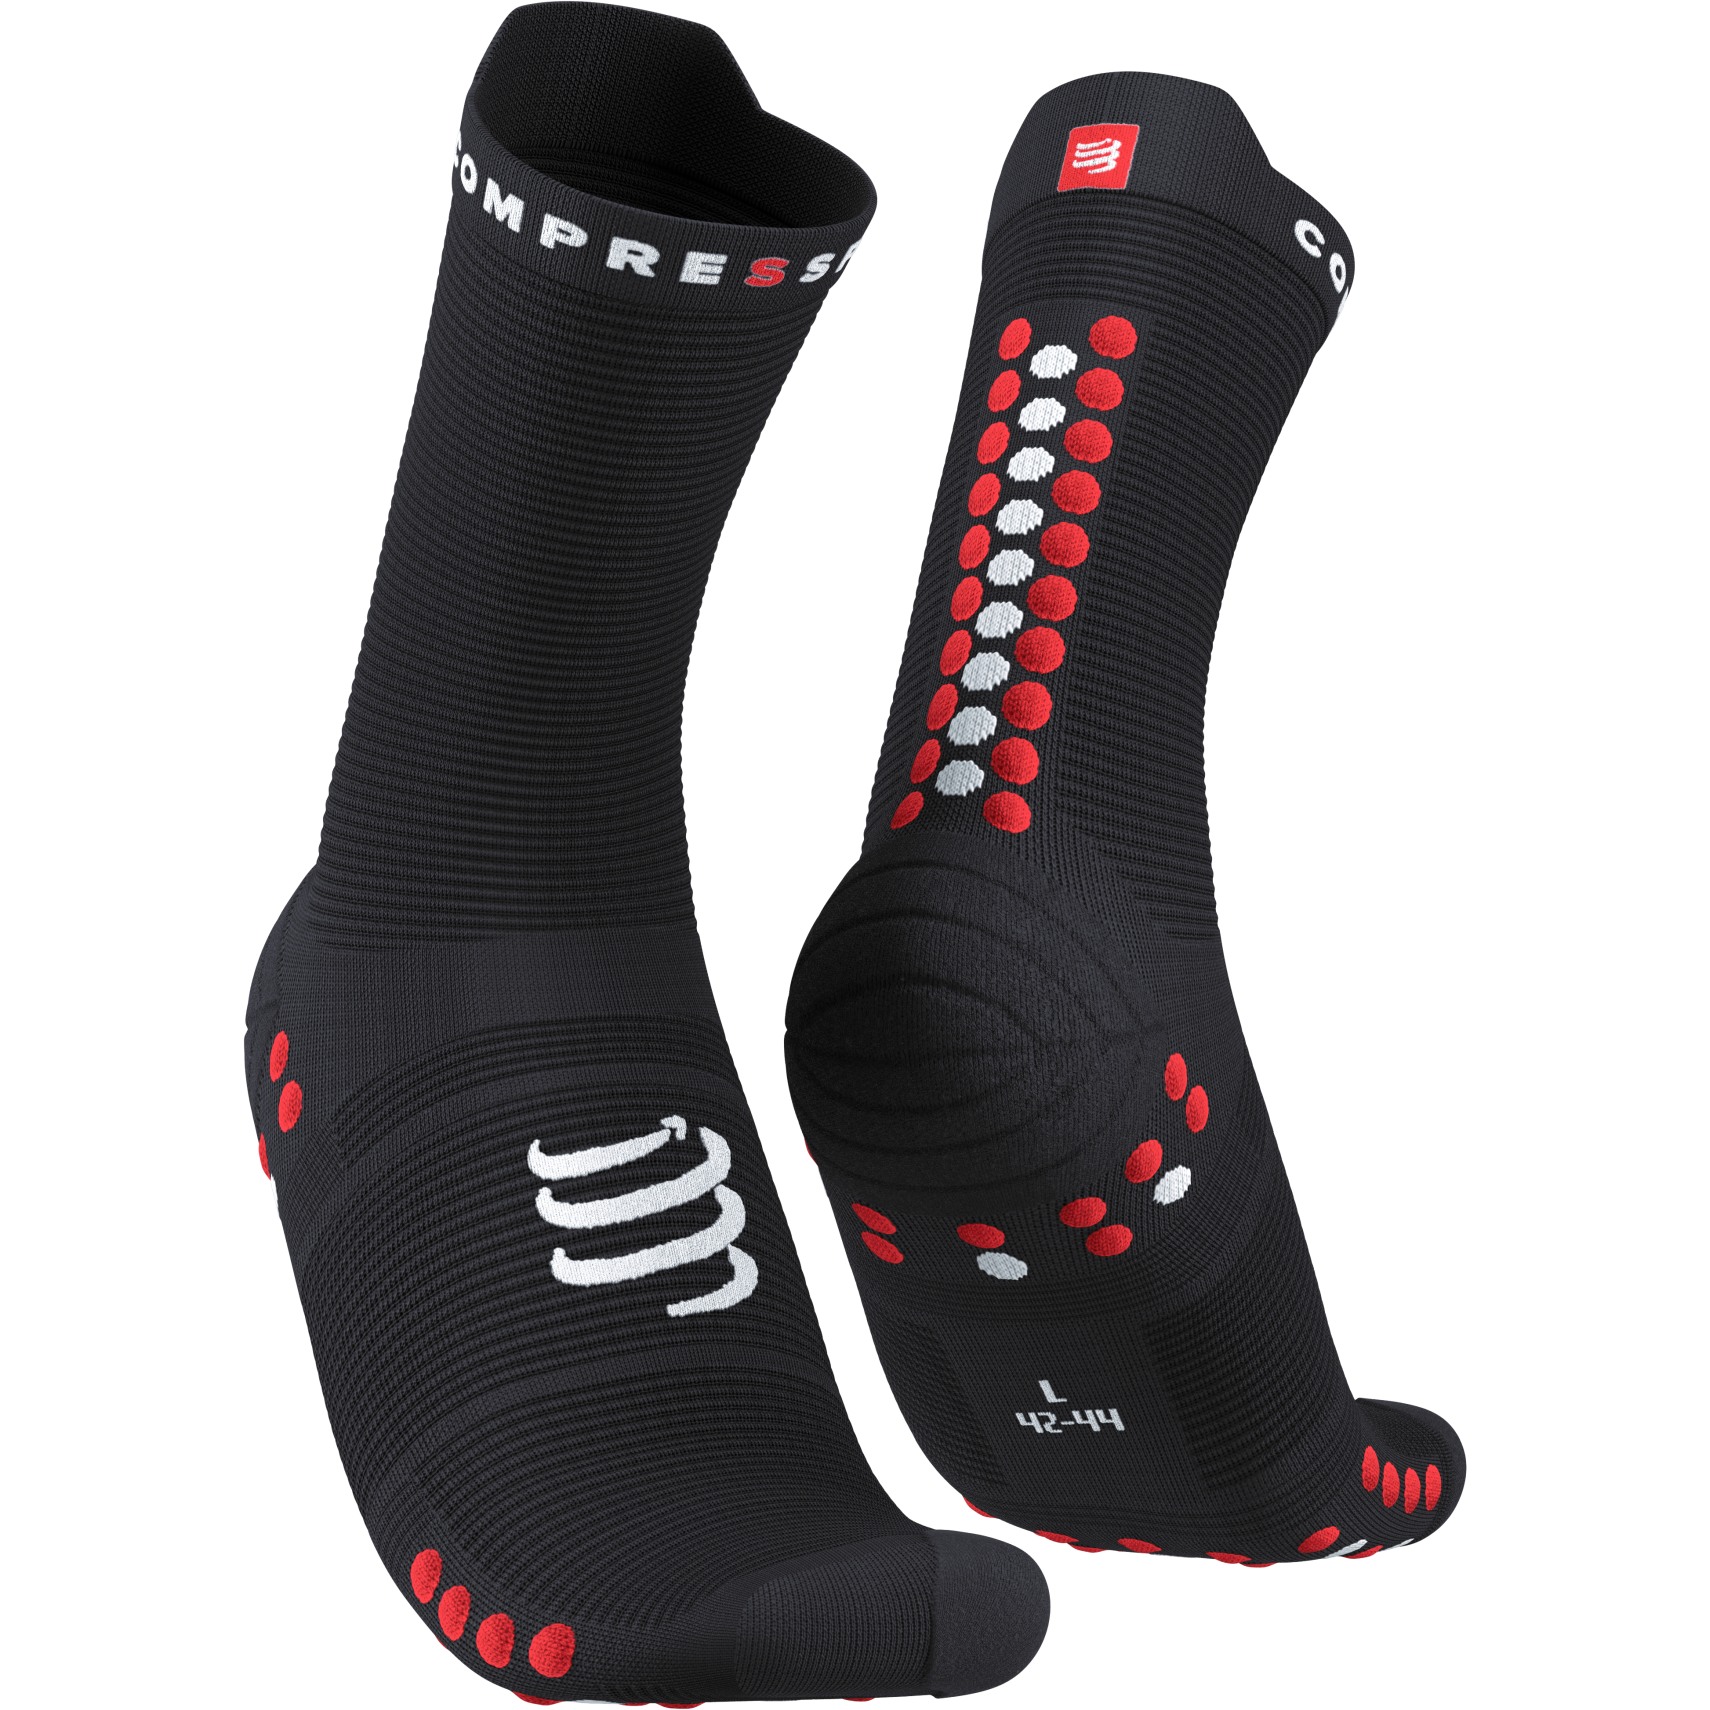 Picture of Compressport Pro Racing Compression Socks v4.0 Run High - black/red